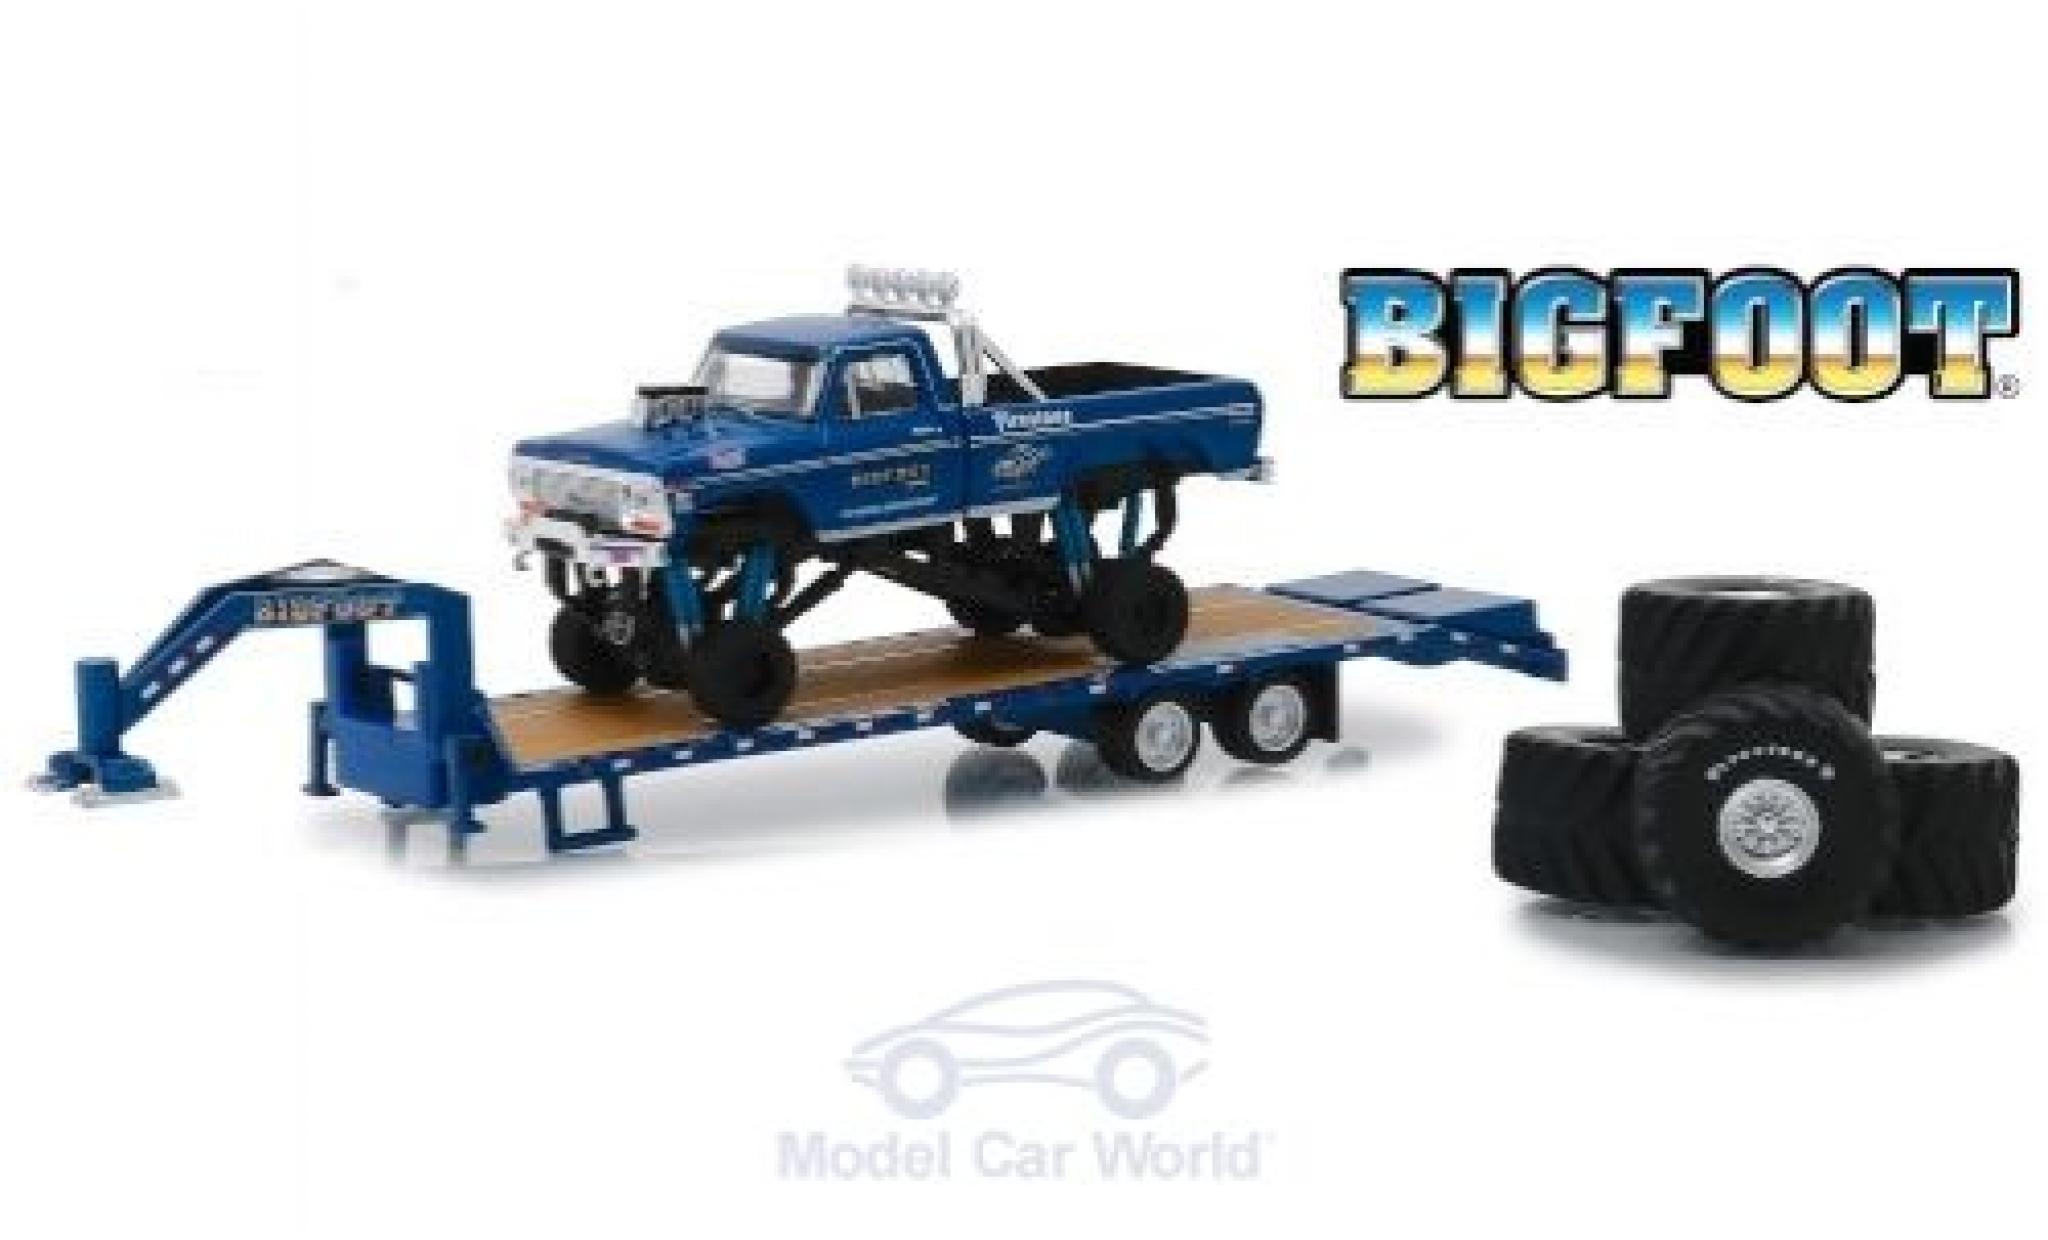 Ford F-250 1/64 Greenlight Monster Truck Bigfoot 1974 with Gooseneck Trailer and Tires